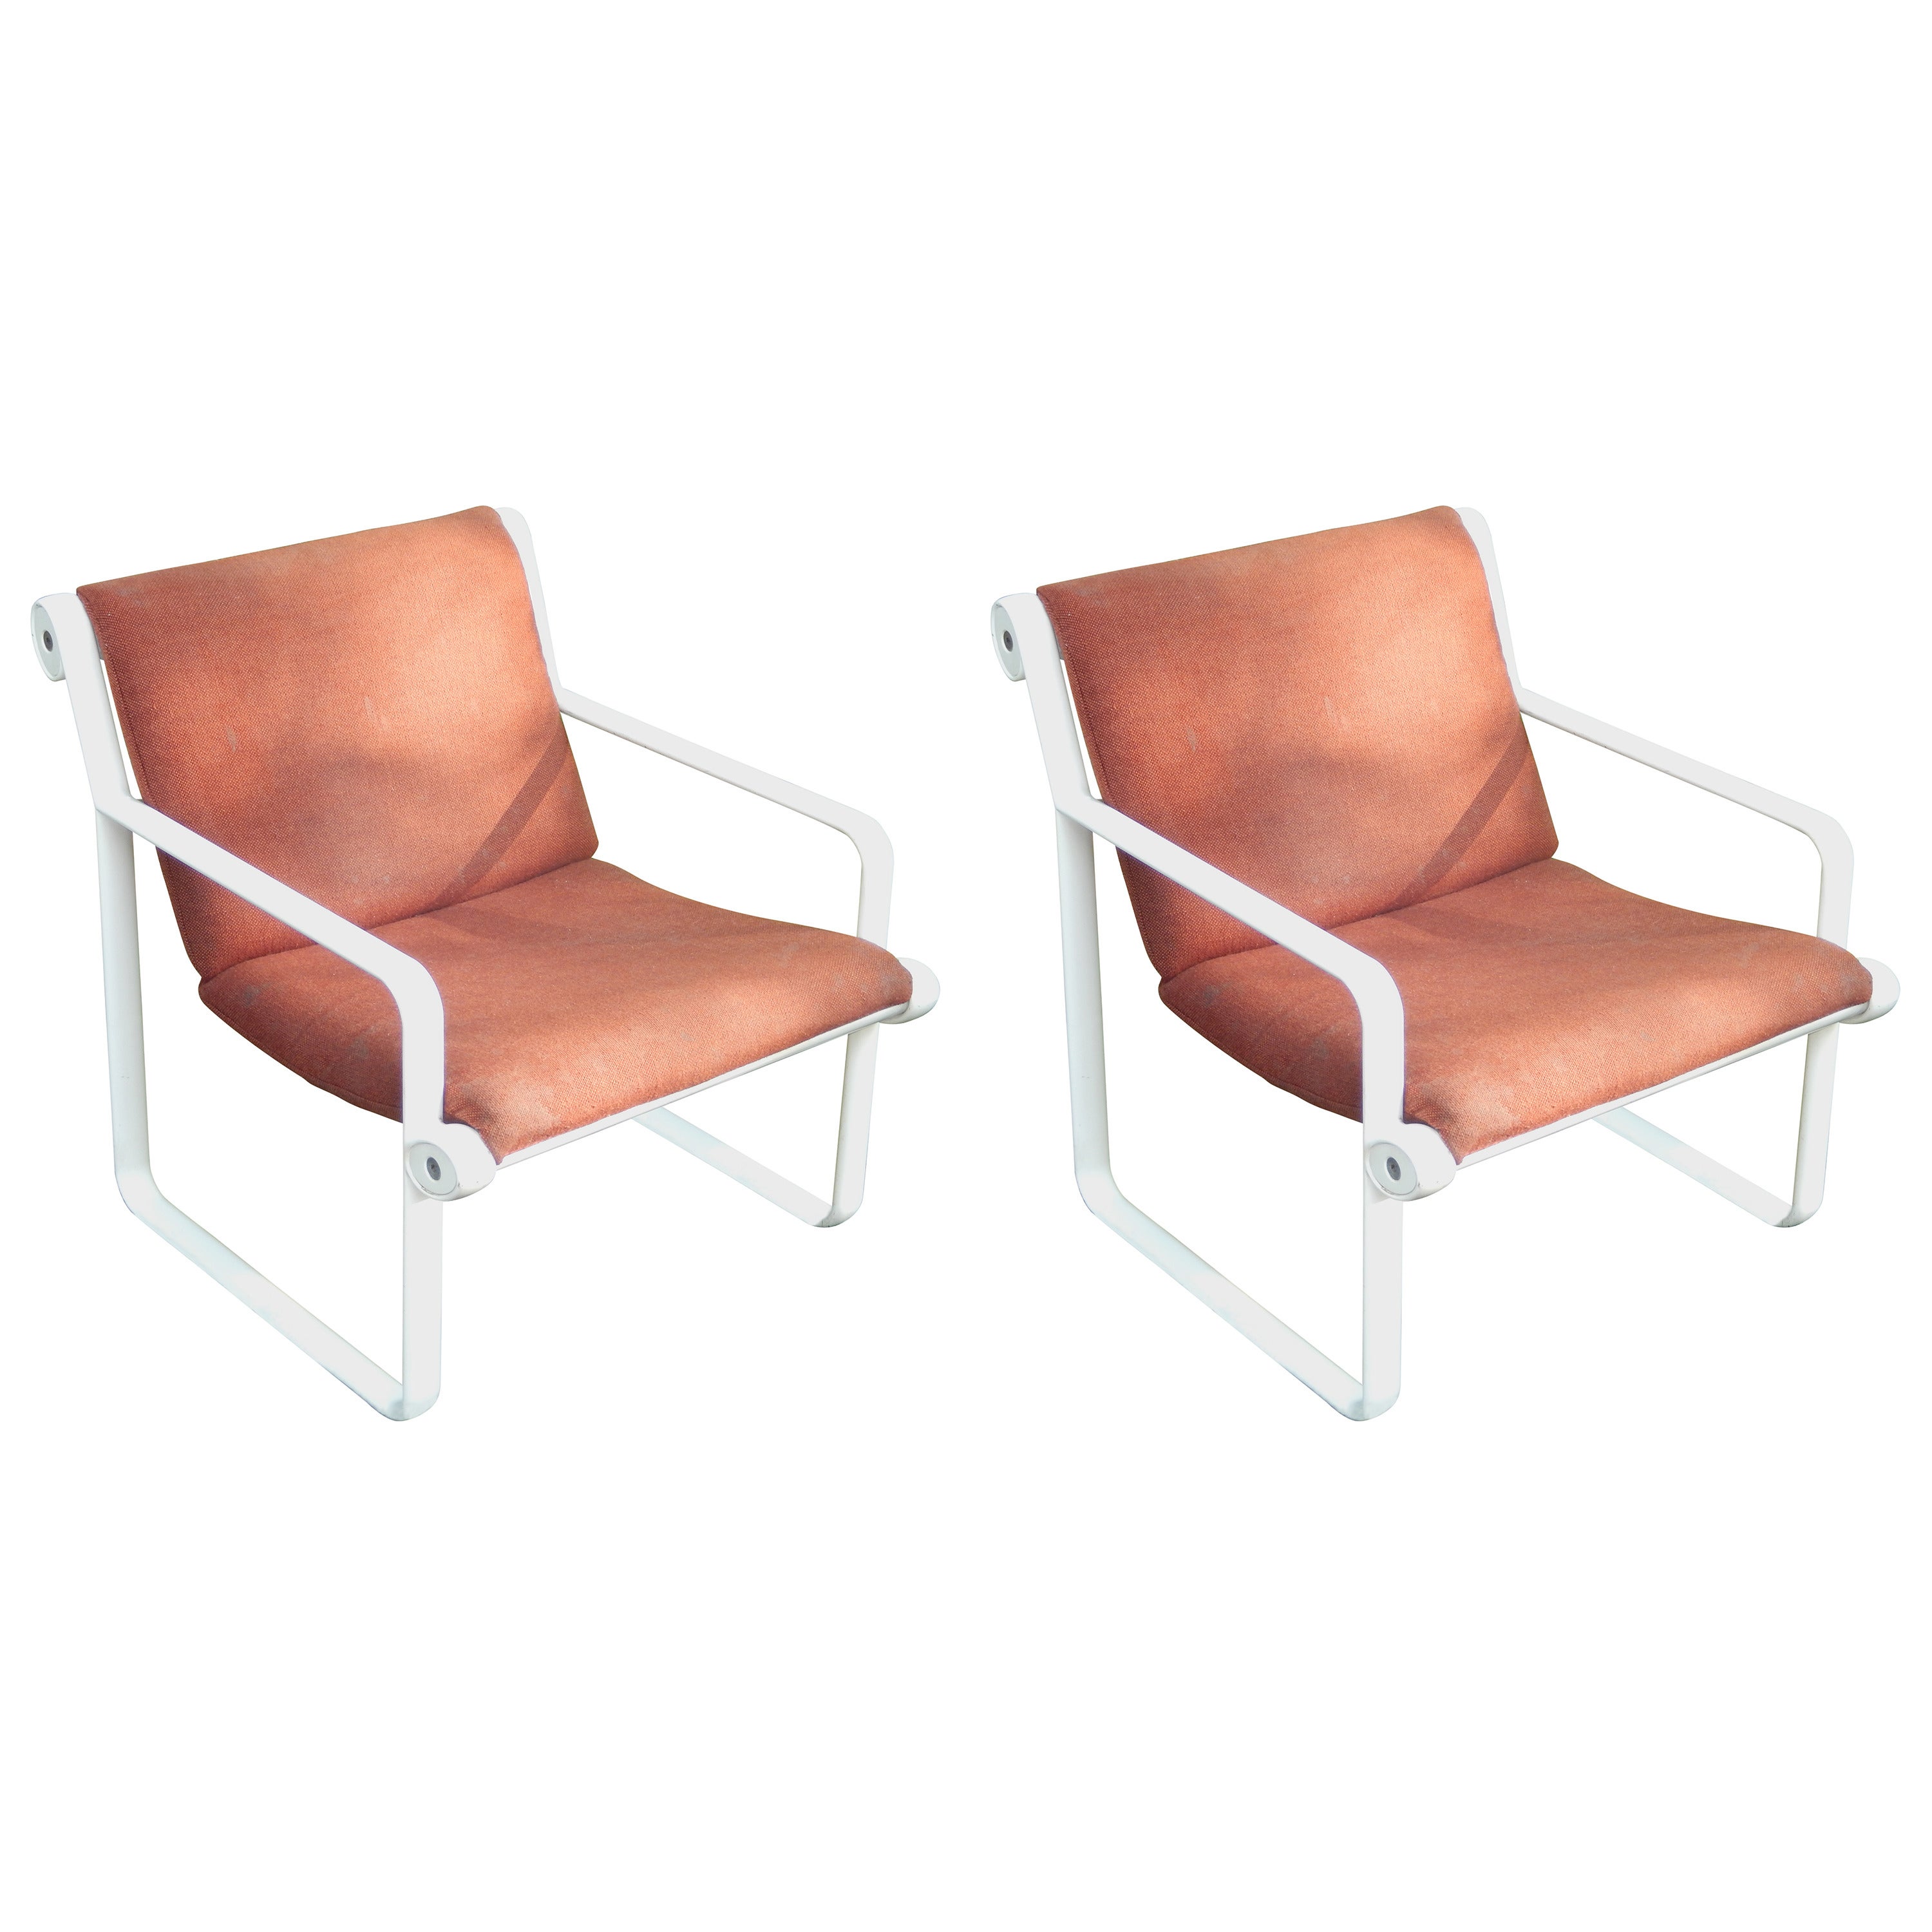 Pair of Aluminum Hannah & Morrison Sling Chairs for Knoll